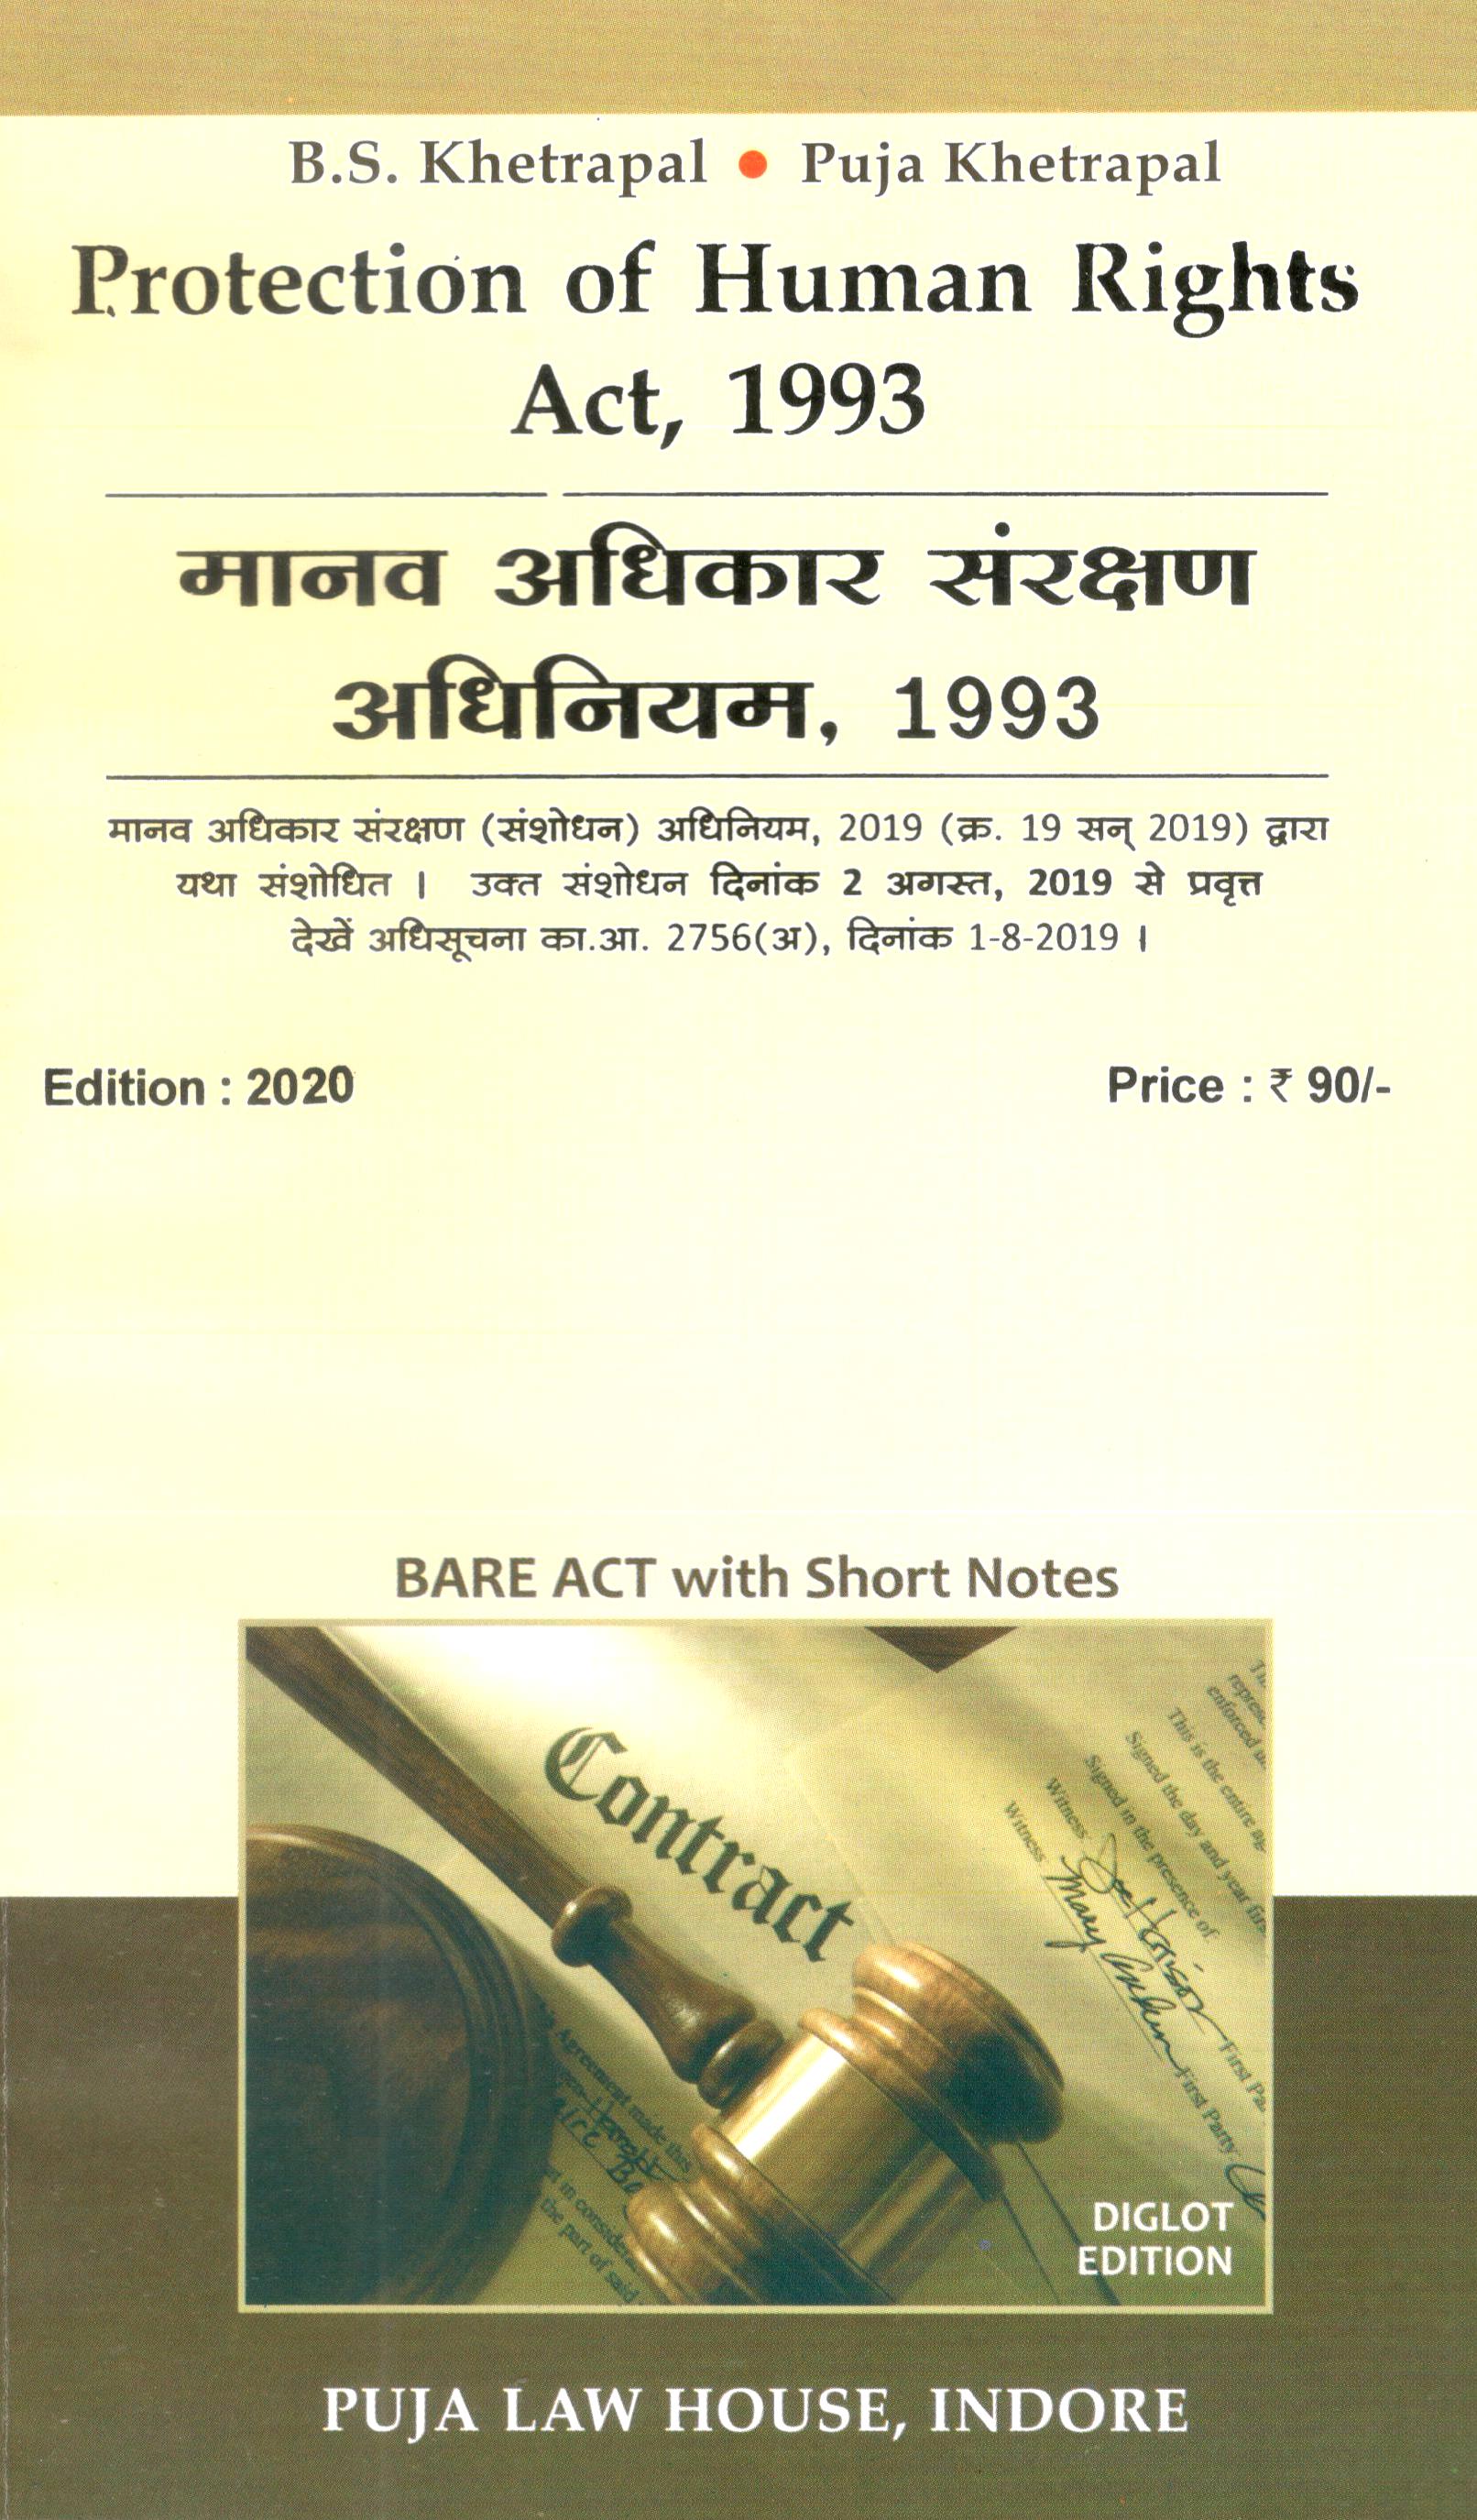 मानव अधिकार संरक्षण अधिनियम, 1993 / Protection of Human Rights Act, 1993 